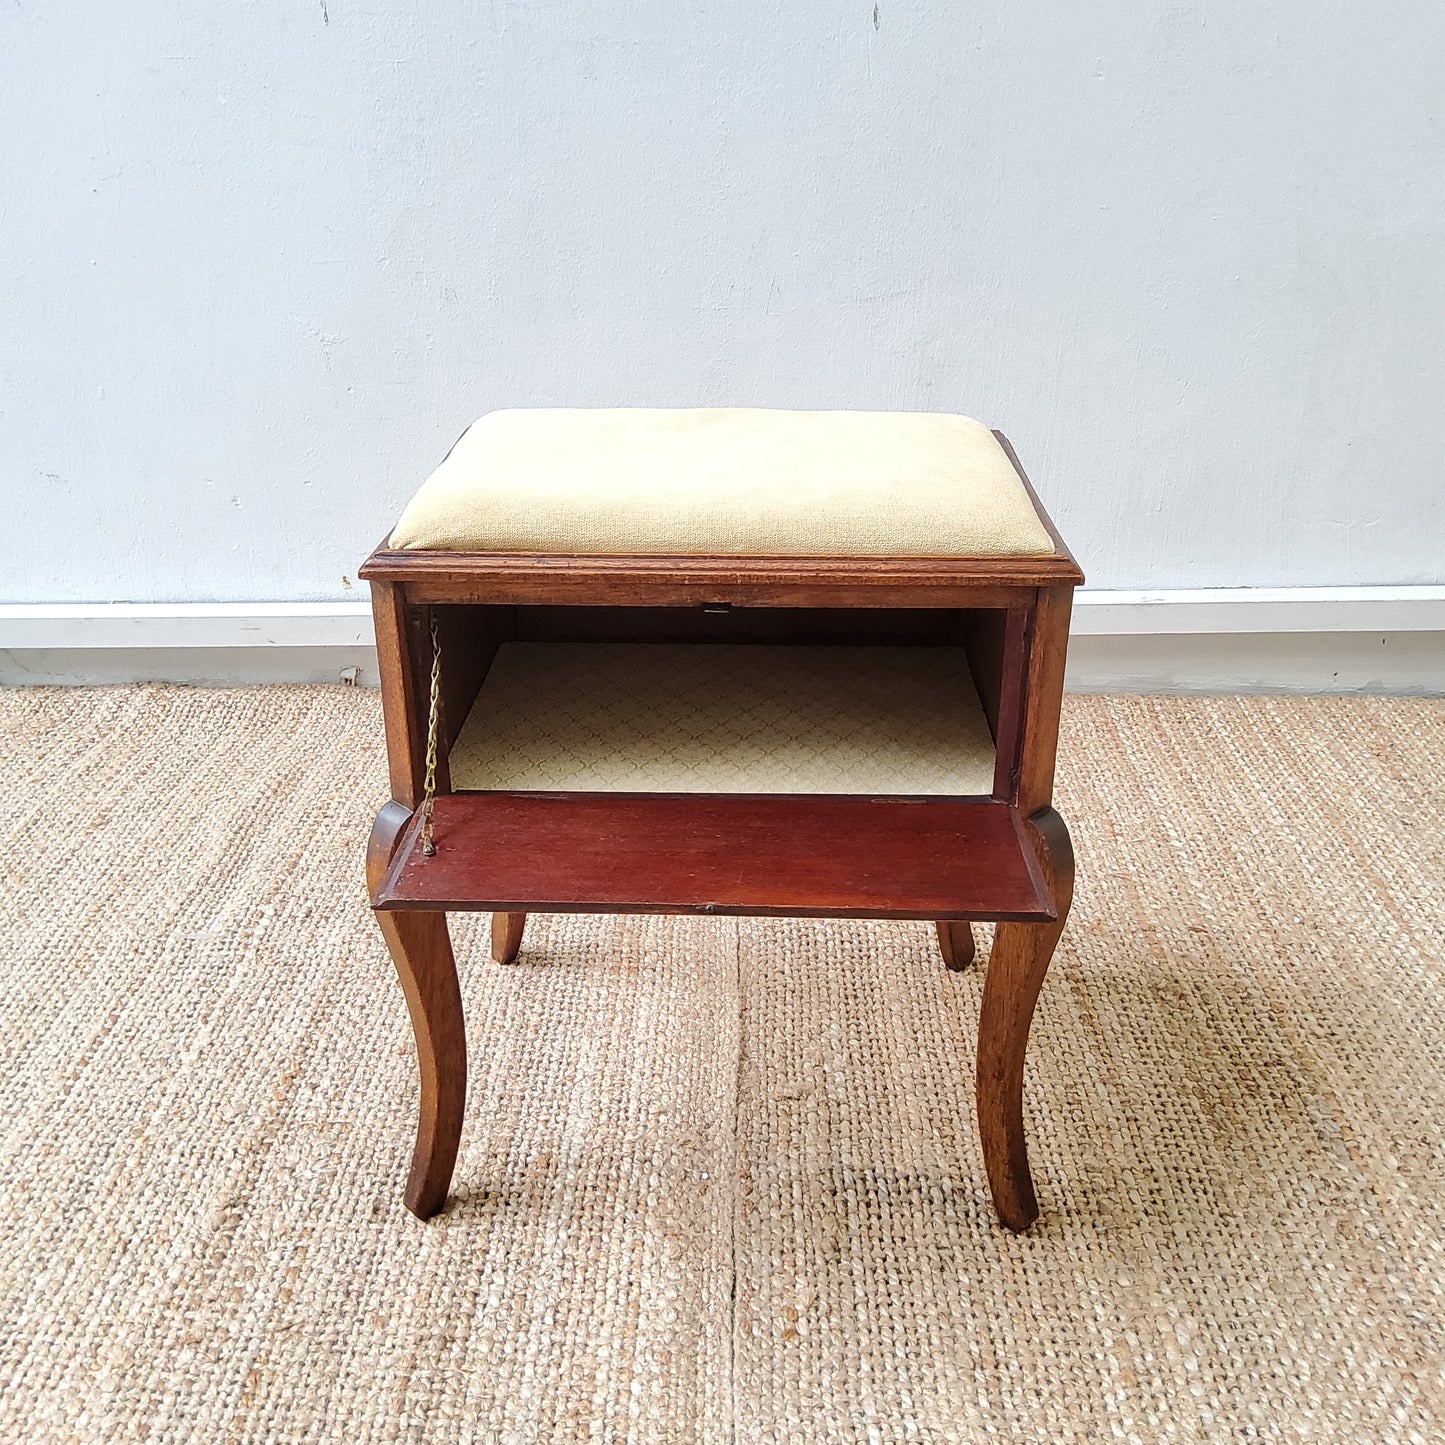 Antique Upholstered Piano Style Stool With Storage